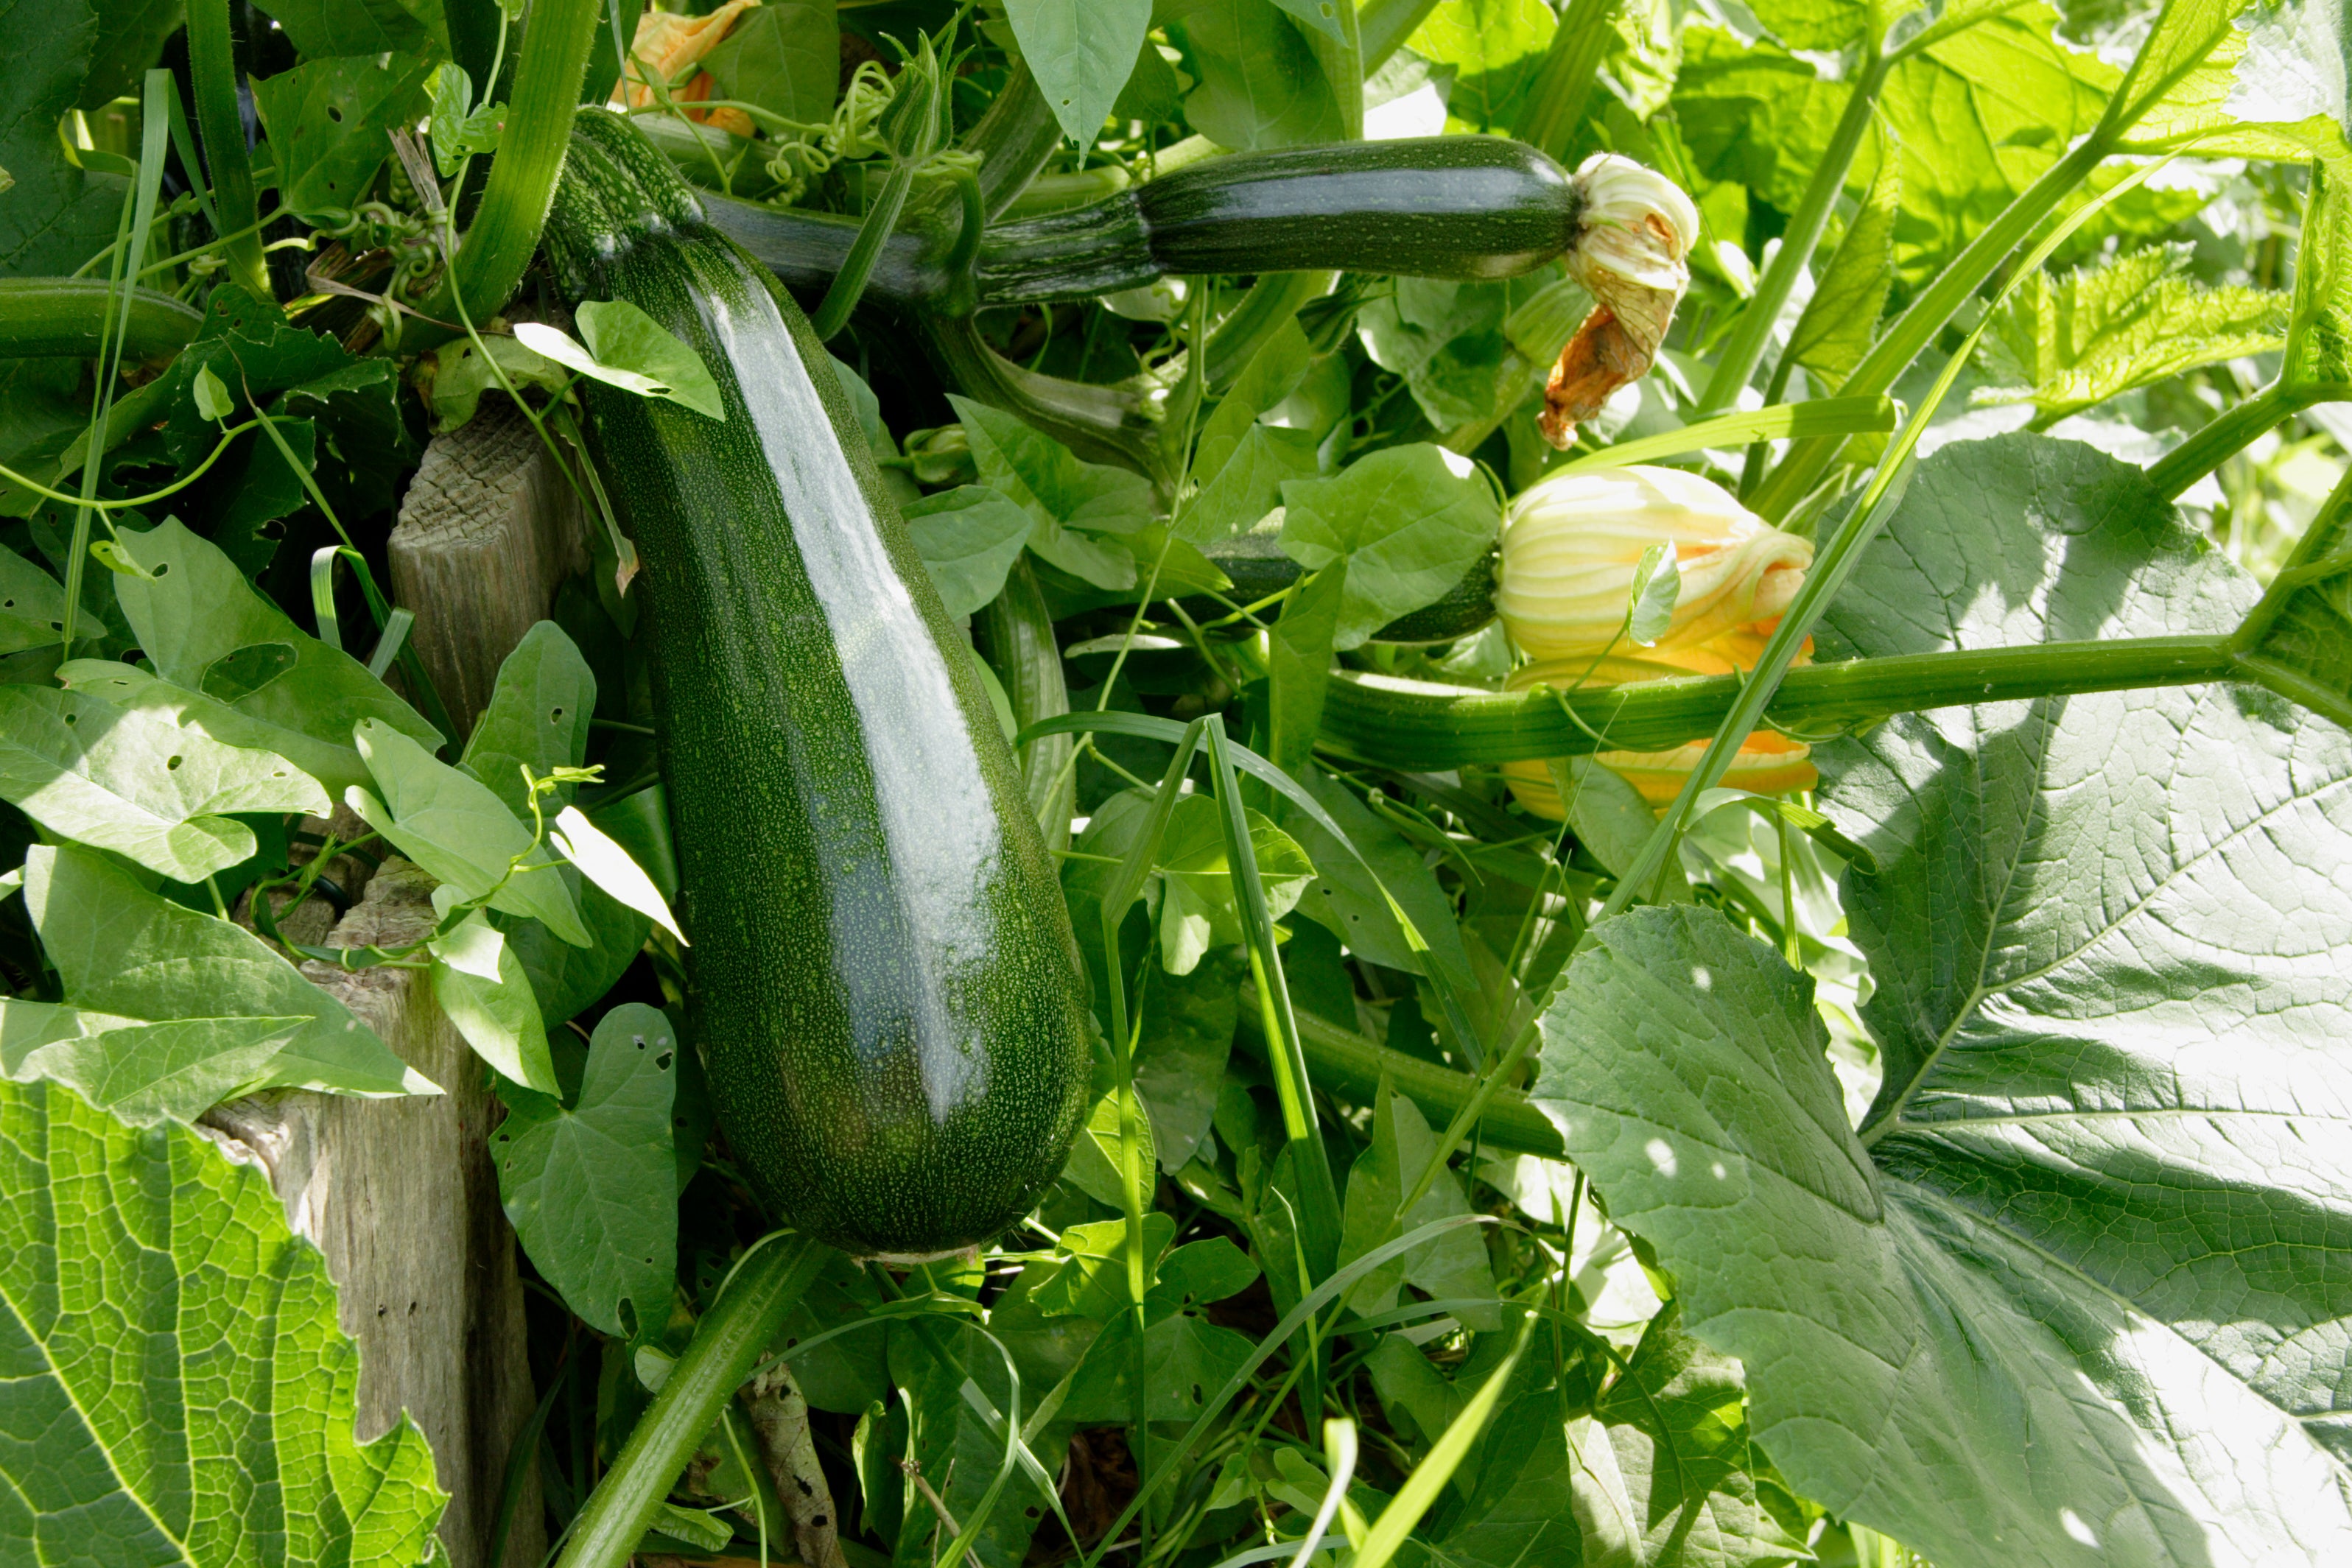 Nasturtiums sown among your courgettes may limit the damage done by insects